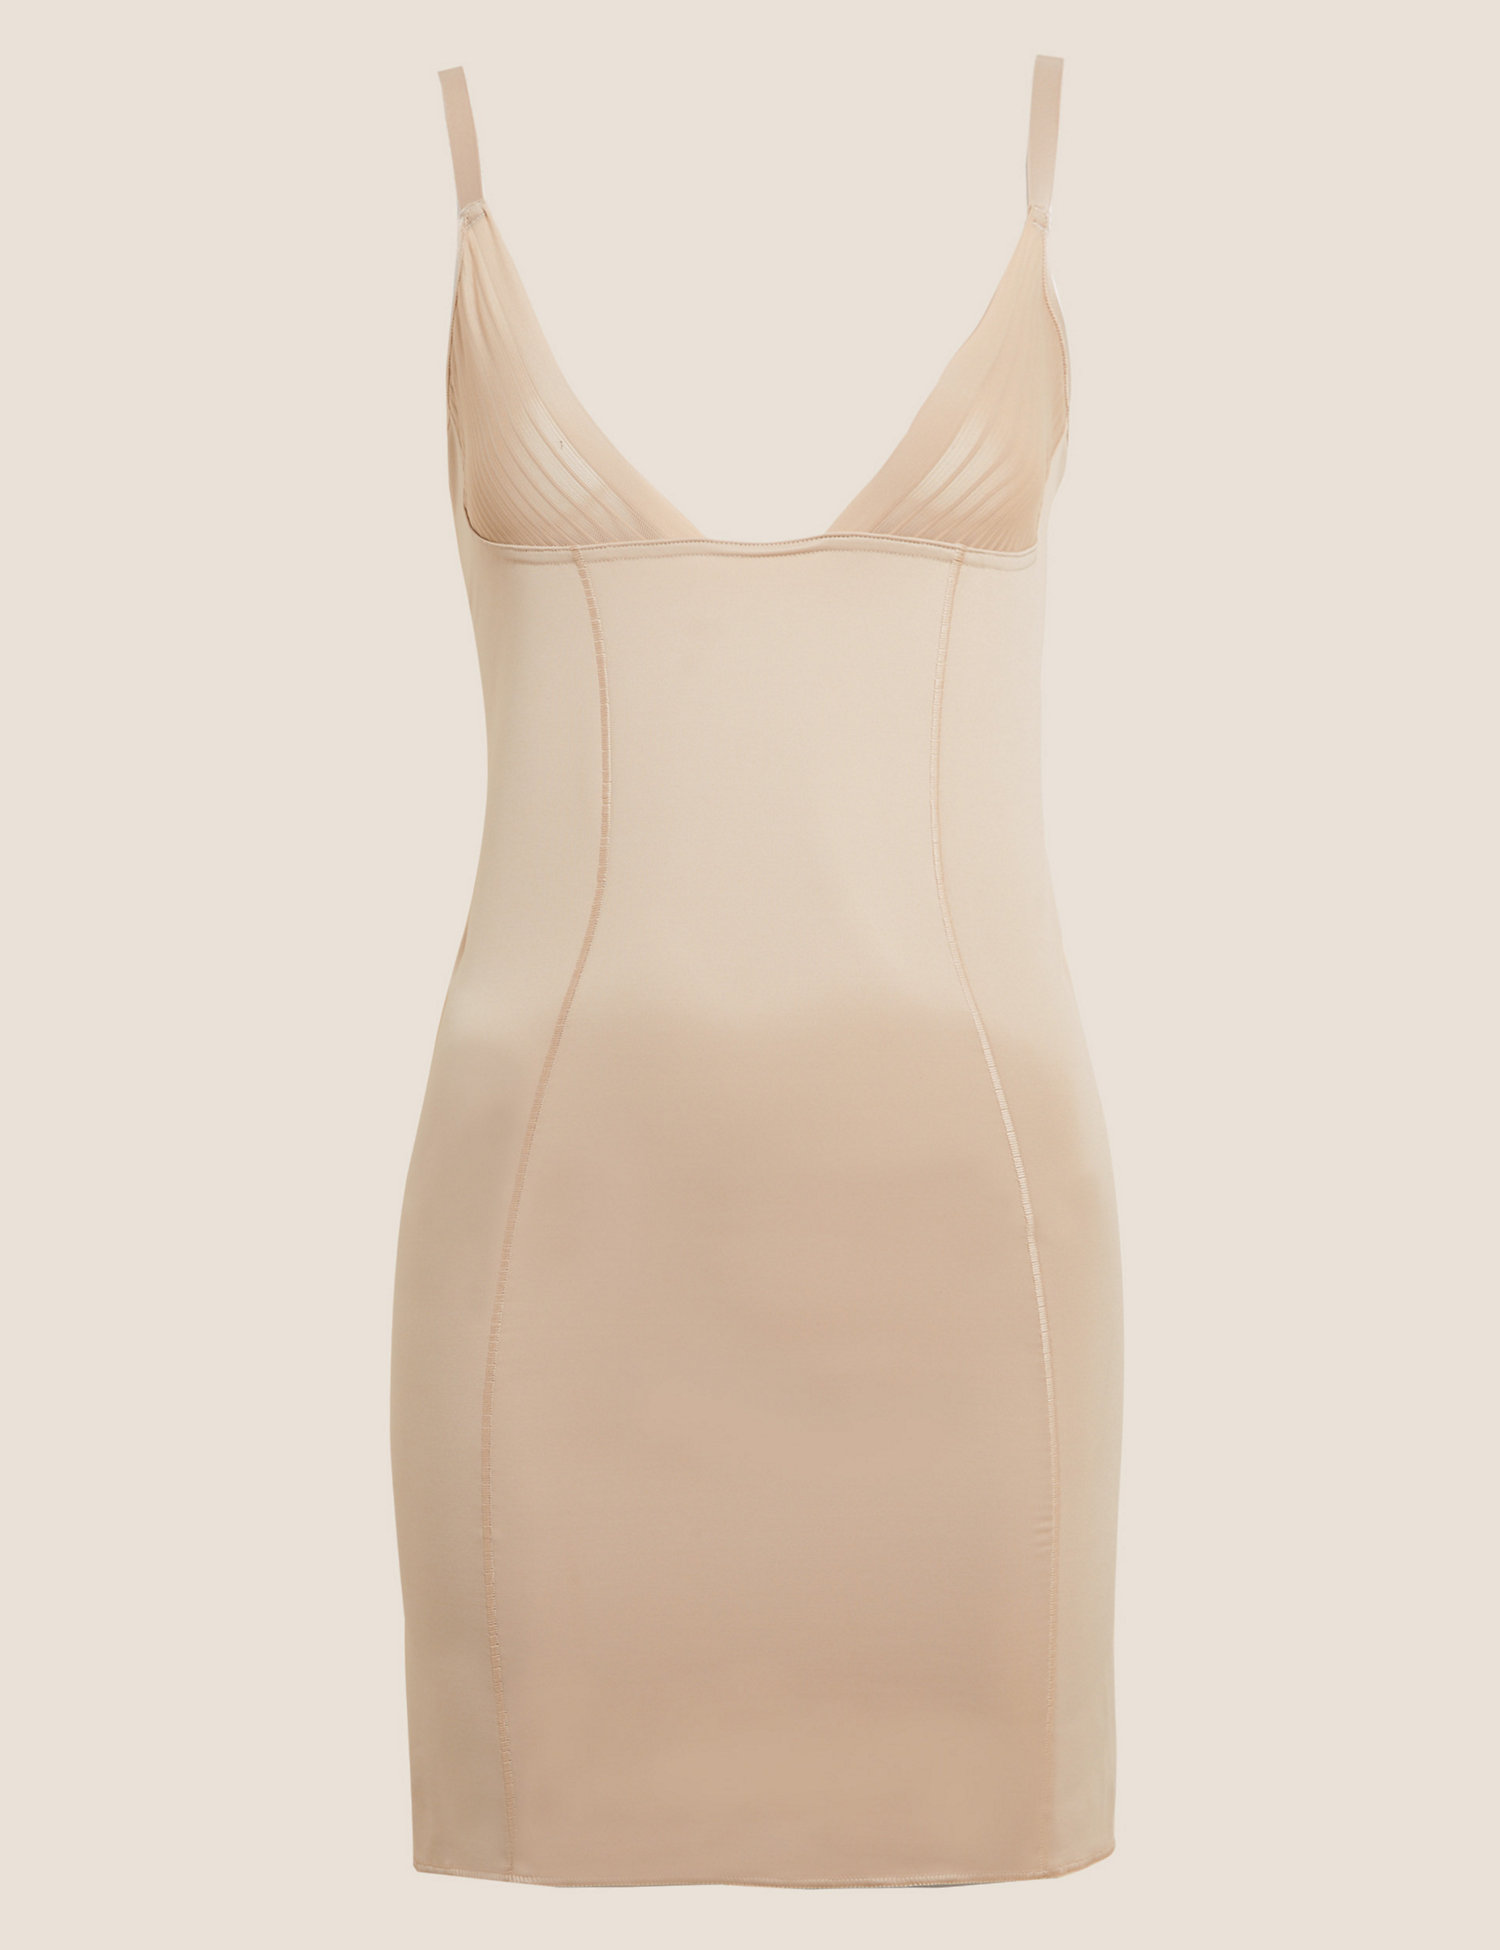 Body Define™ Firm Control Shaping Slip in rose quartz from M&S / Marks & Spencer 